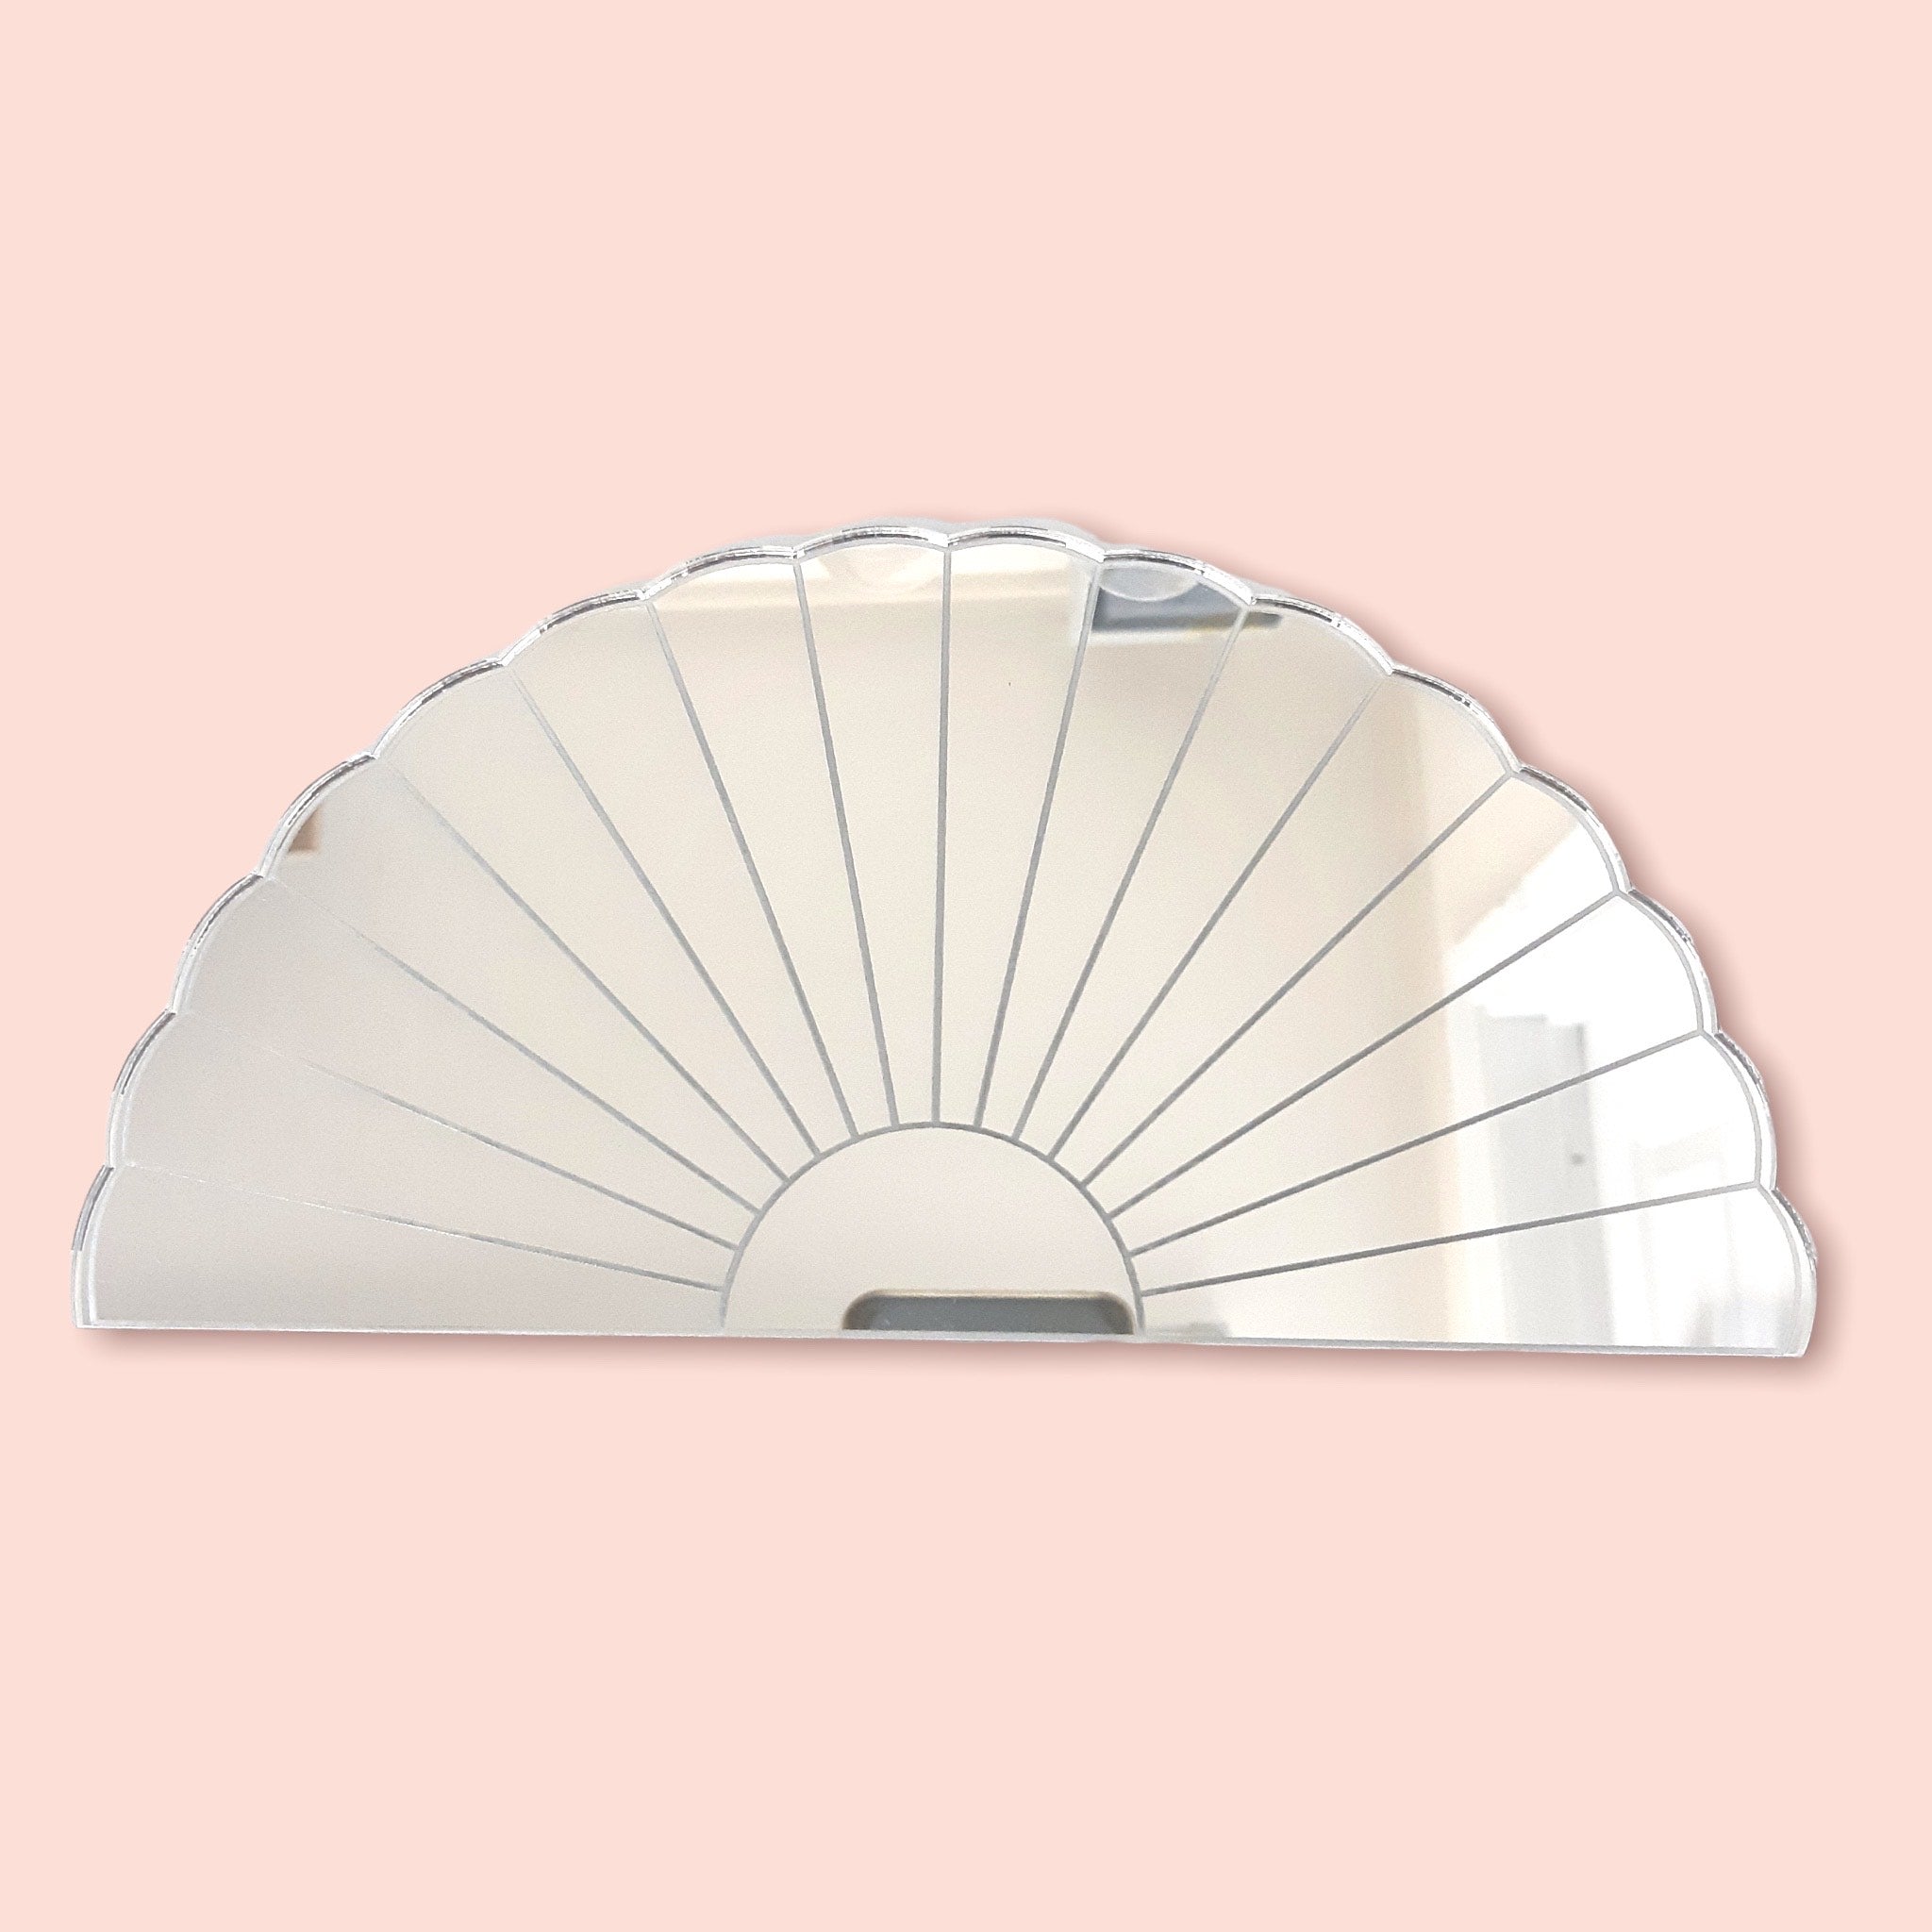 Art Deco Fan Shaped Mirrors with White Backing & Hooks